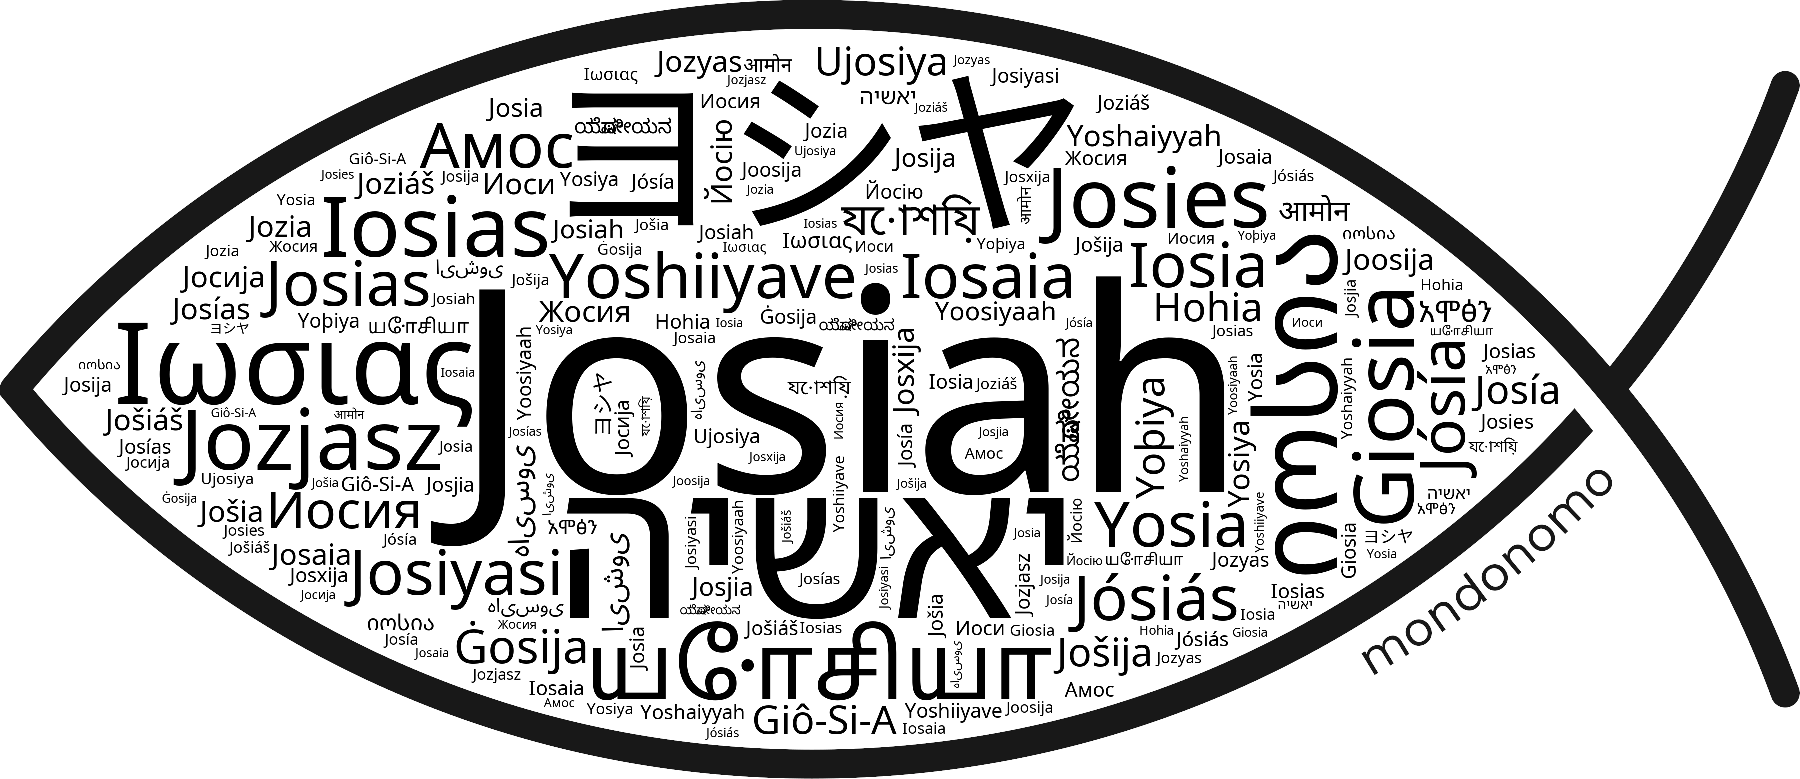 Name Josiah in the world's Bibles